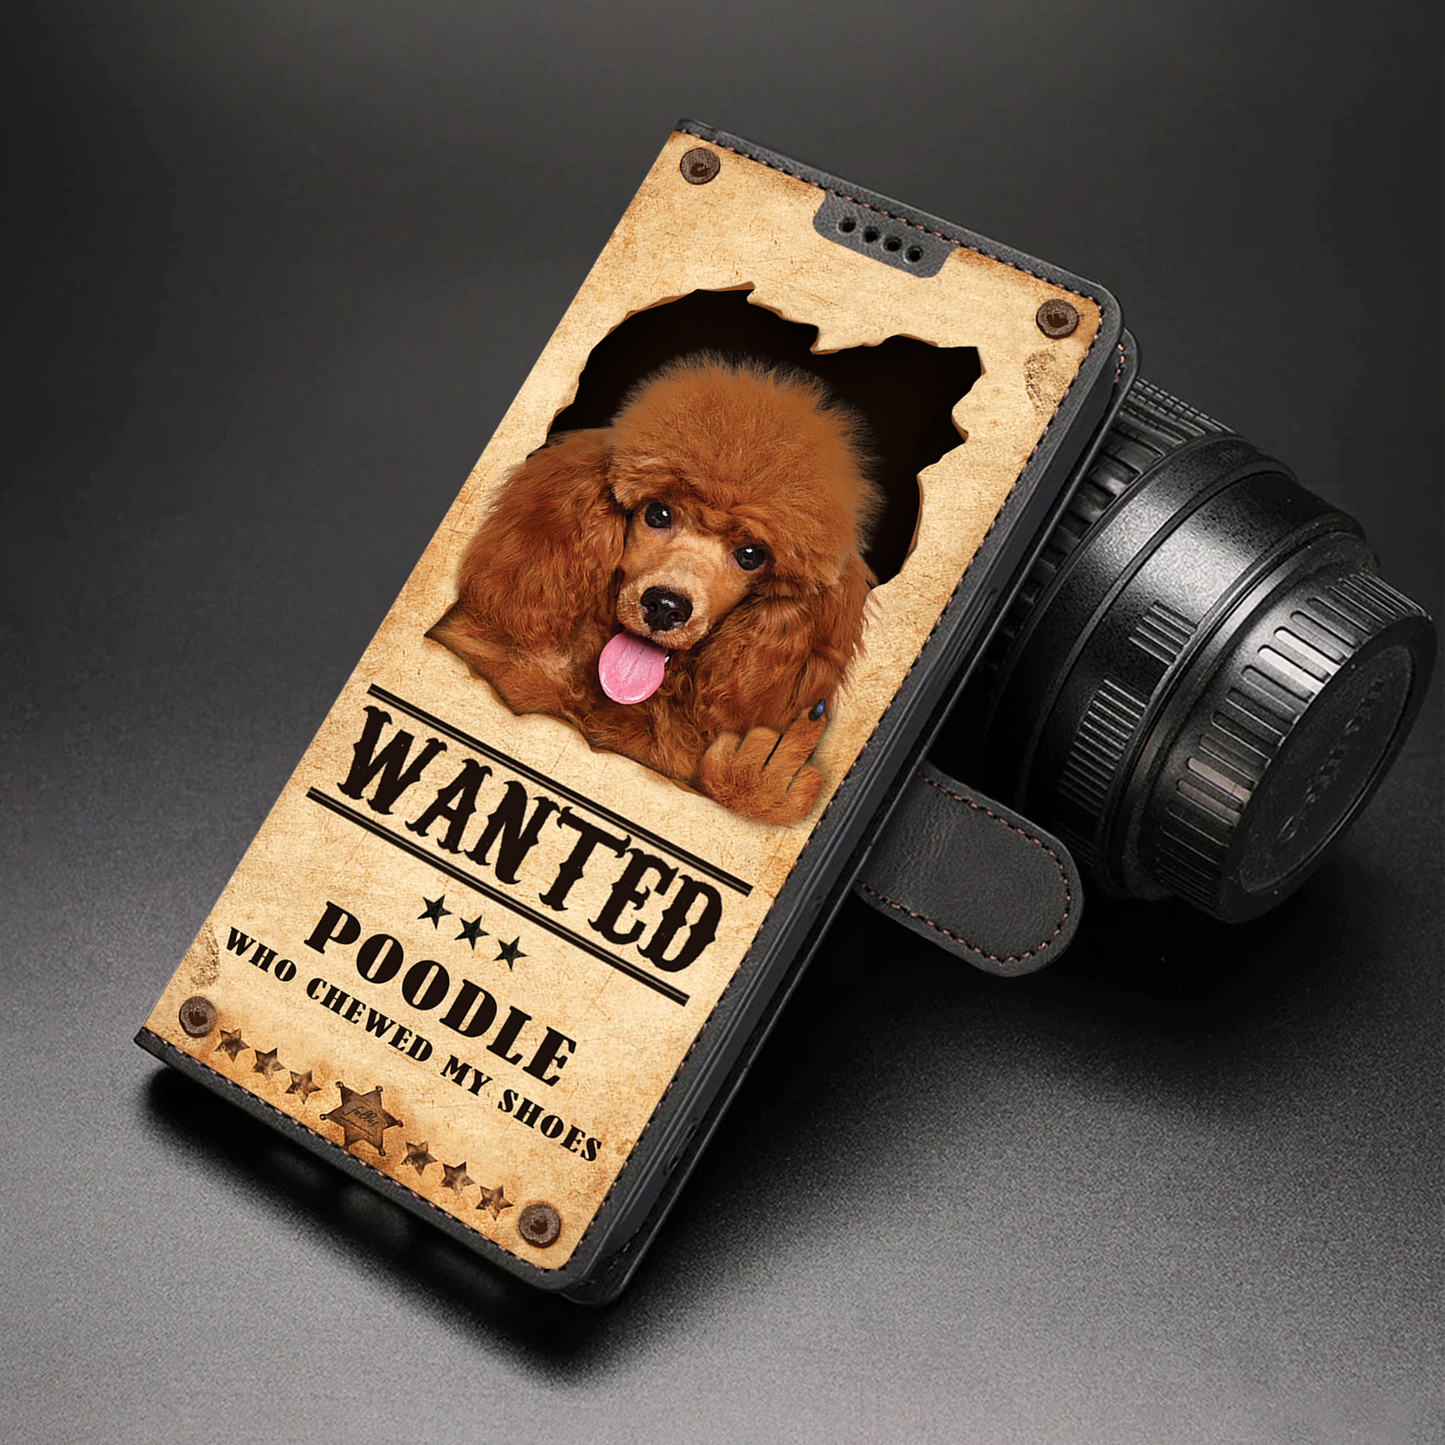 Poodle Wanted - Fun Wallet Phone Case V1